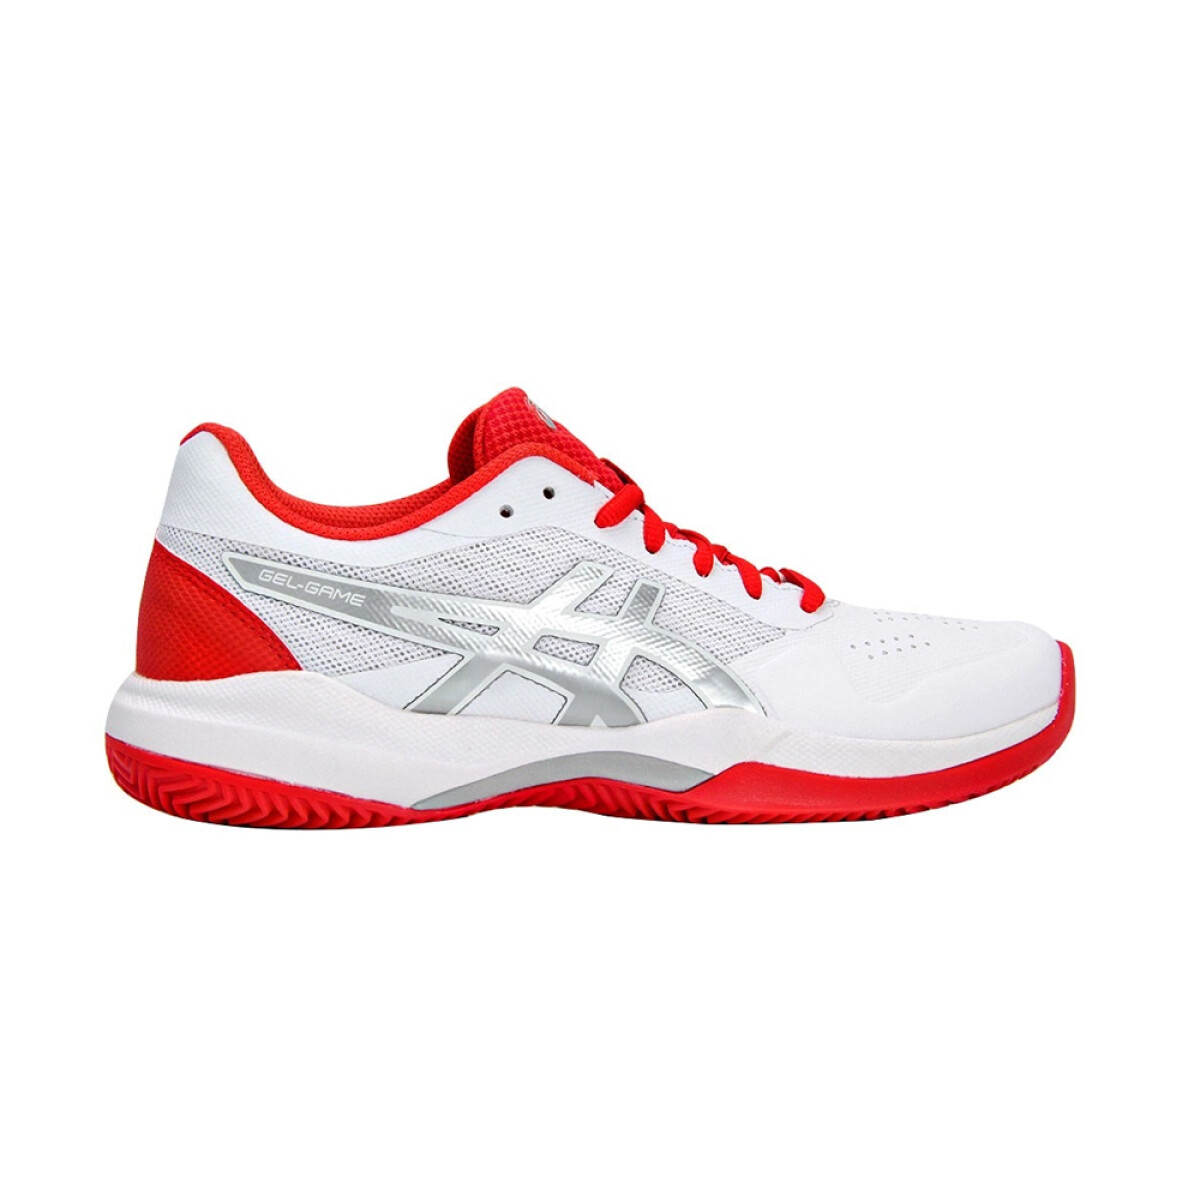 ASICS GEL-GAME 7 CLAY/OC - White/Red 